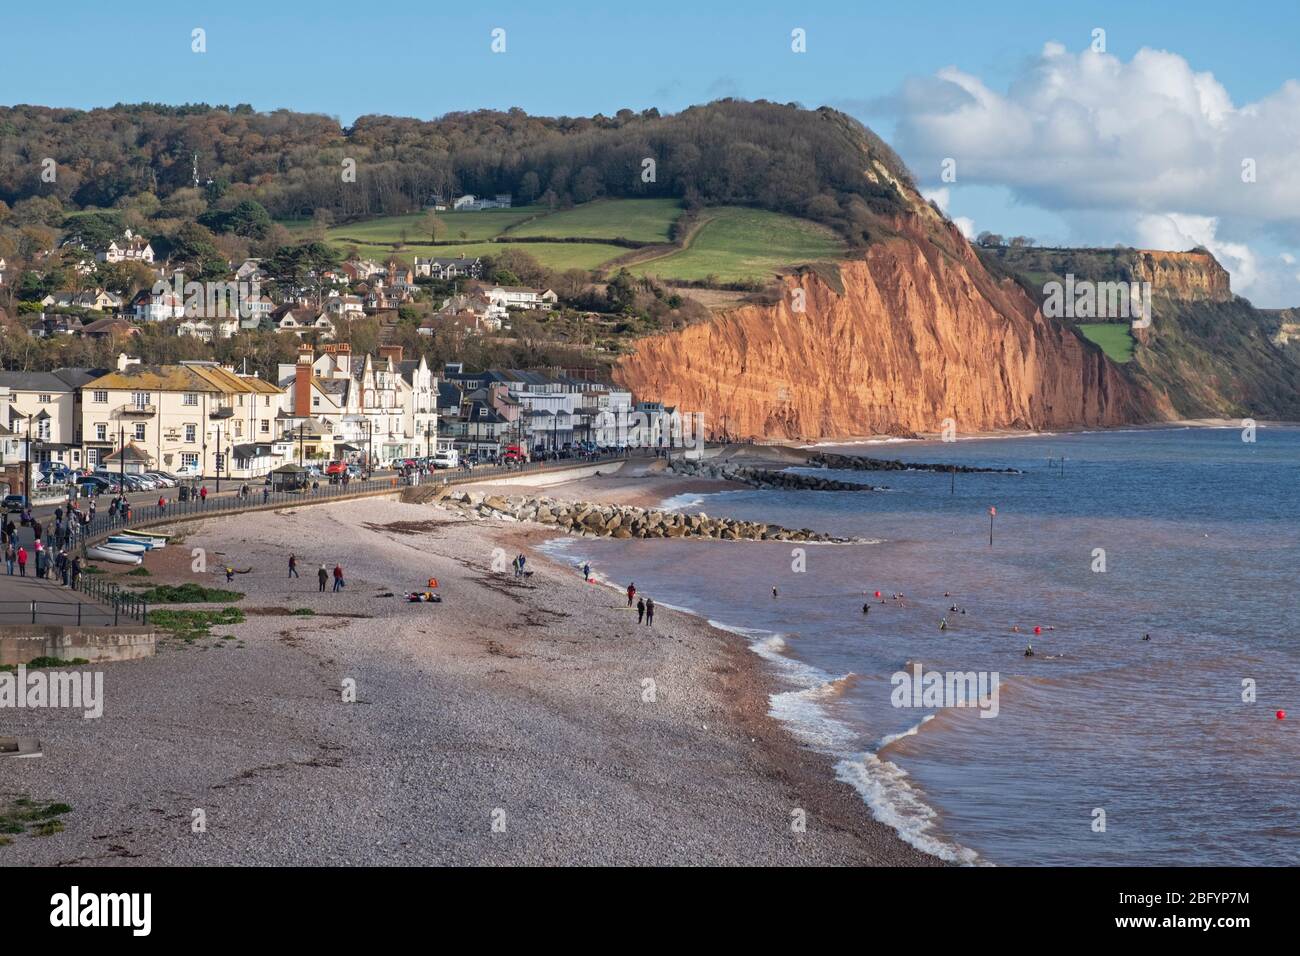 Sidmouth, England - November 7, 2019: The pebbled foreshore is a popular attraction in the Devon town for locals and holidaymakers all the year round Stock Photo